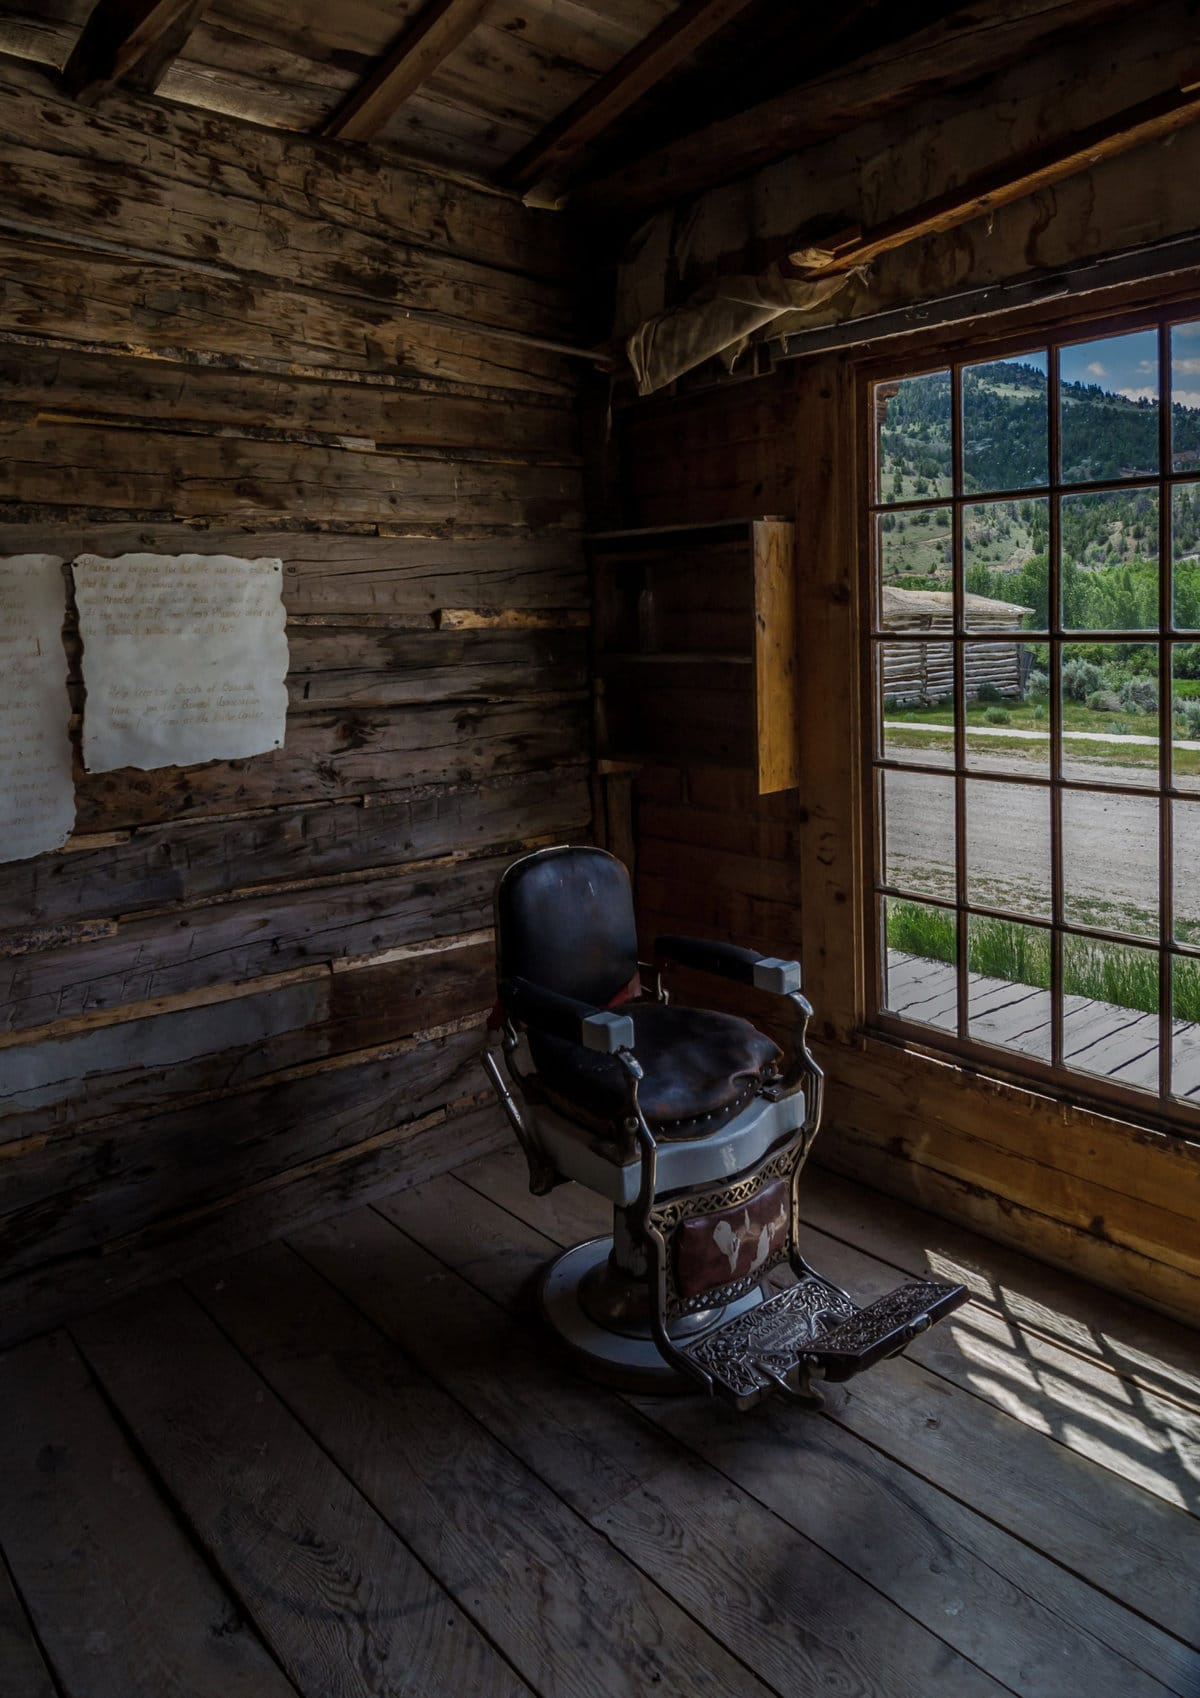 An old barber chair in Bannack, Montana